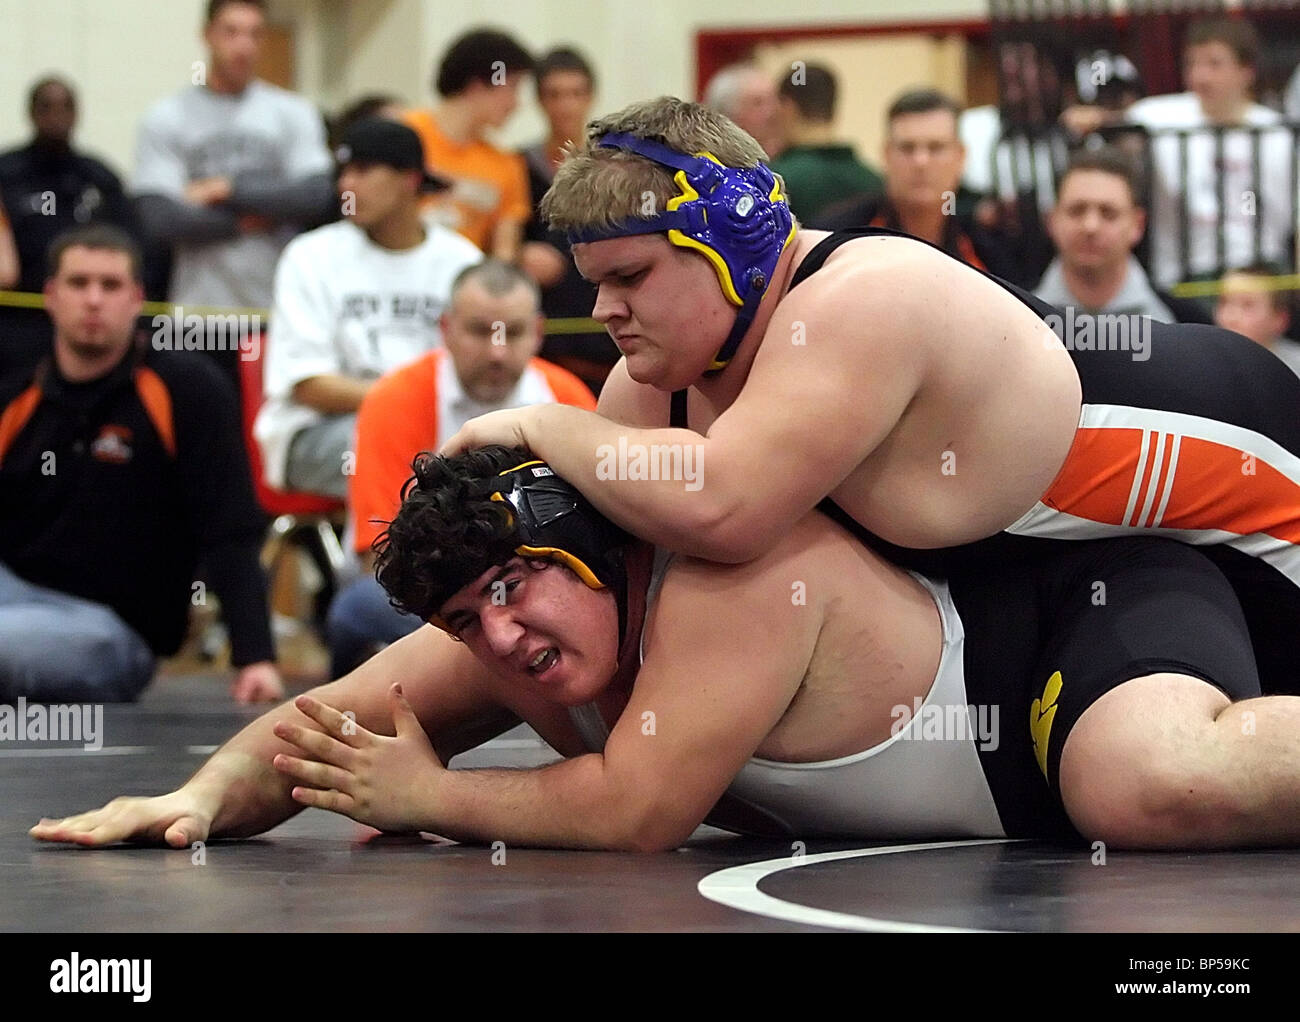 Heavyweight wrestlers during a high school tournament in Connecticut USA Stock Photo